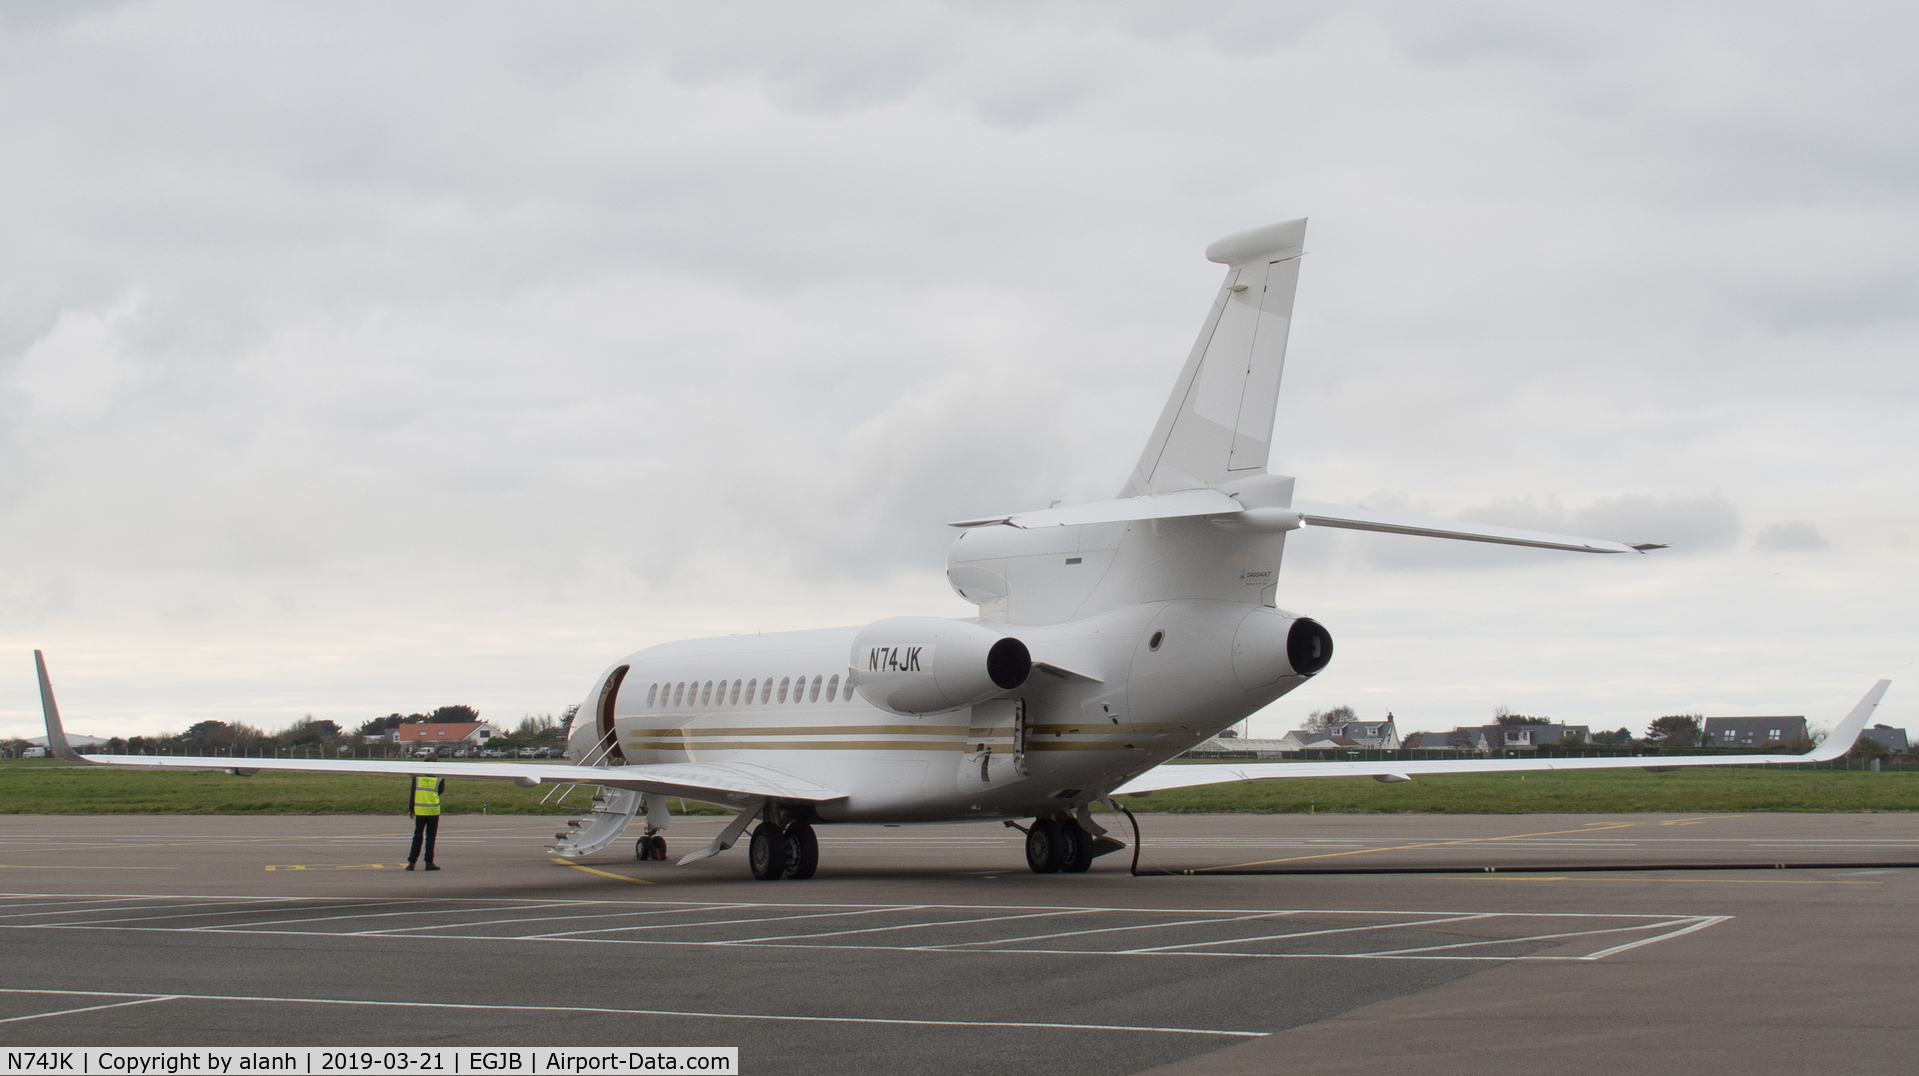 N74JK, 2011 Dassault Falcon 7X C/N 136, Refueling outside the Aigle hangar at Guernsey, following a registration change from HZ-SPAJ